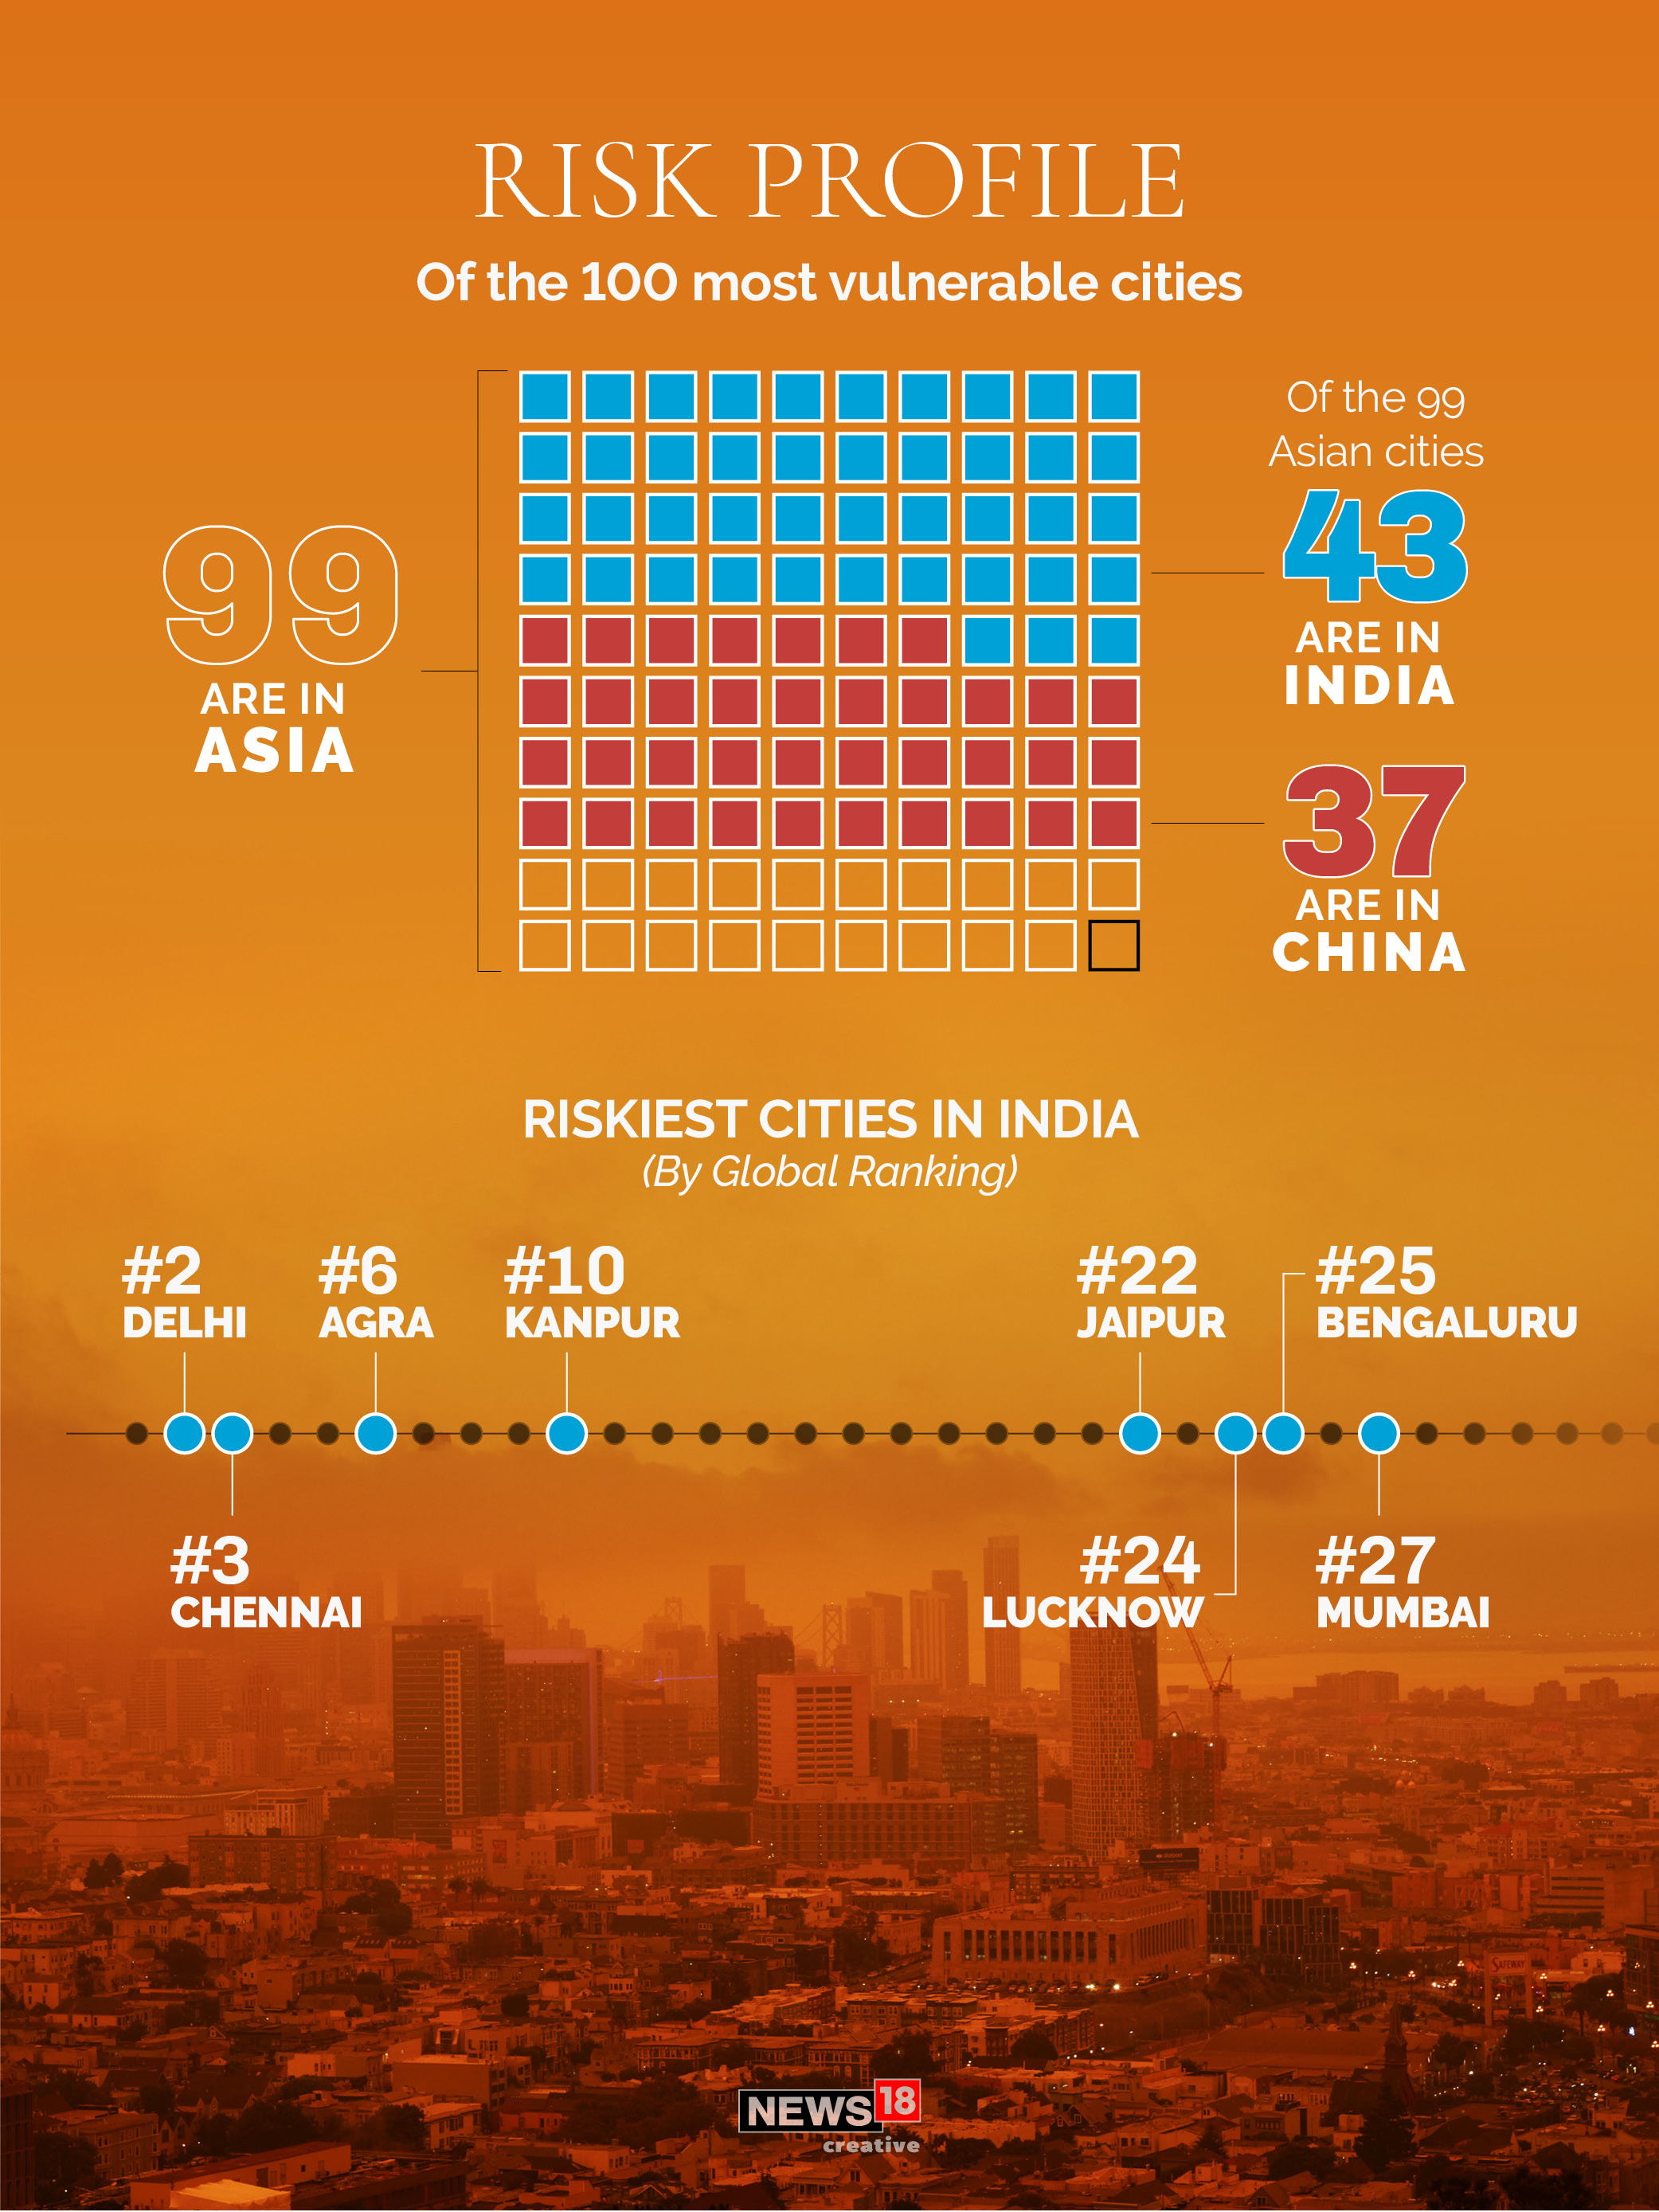 99 out of 100 of the world's most climate vulnerable cities are in Asia